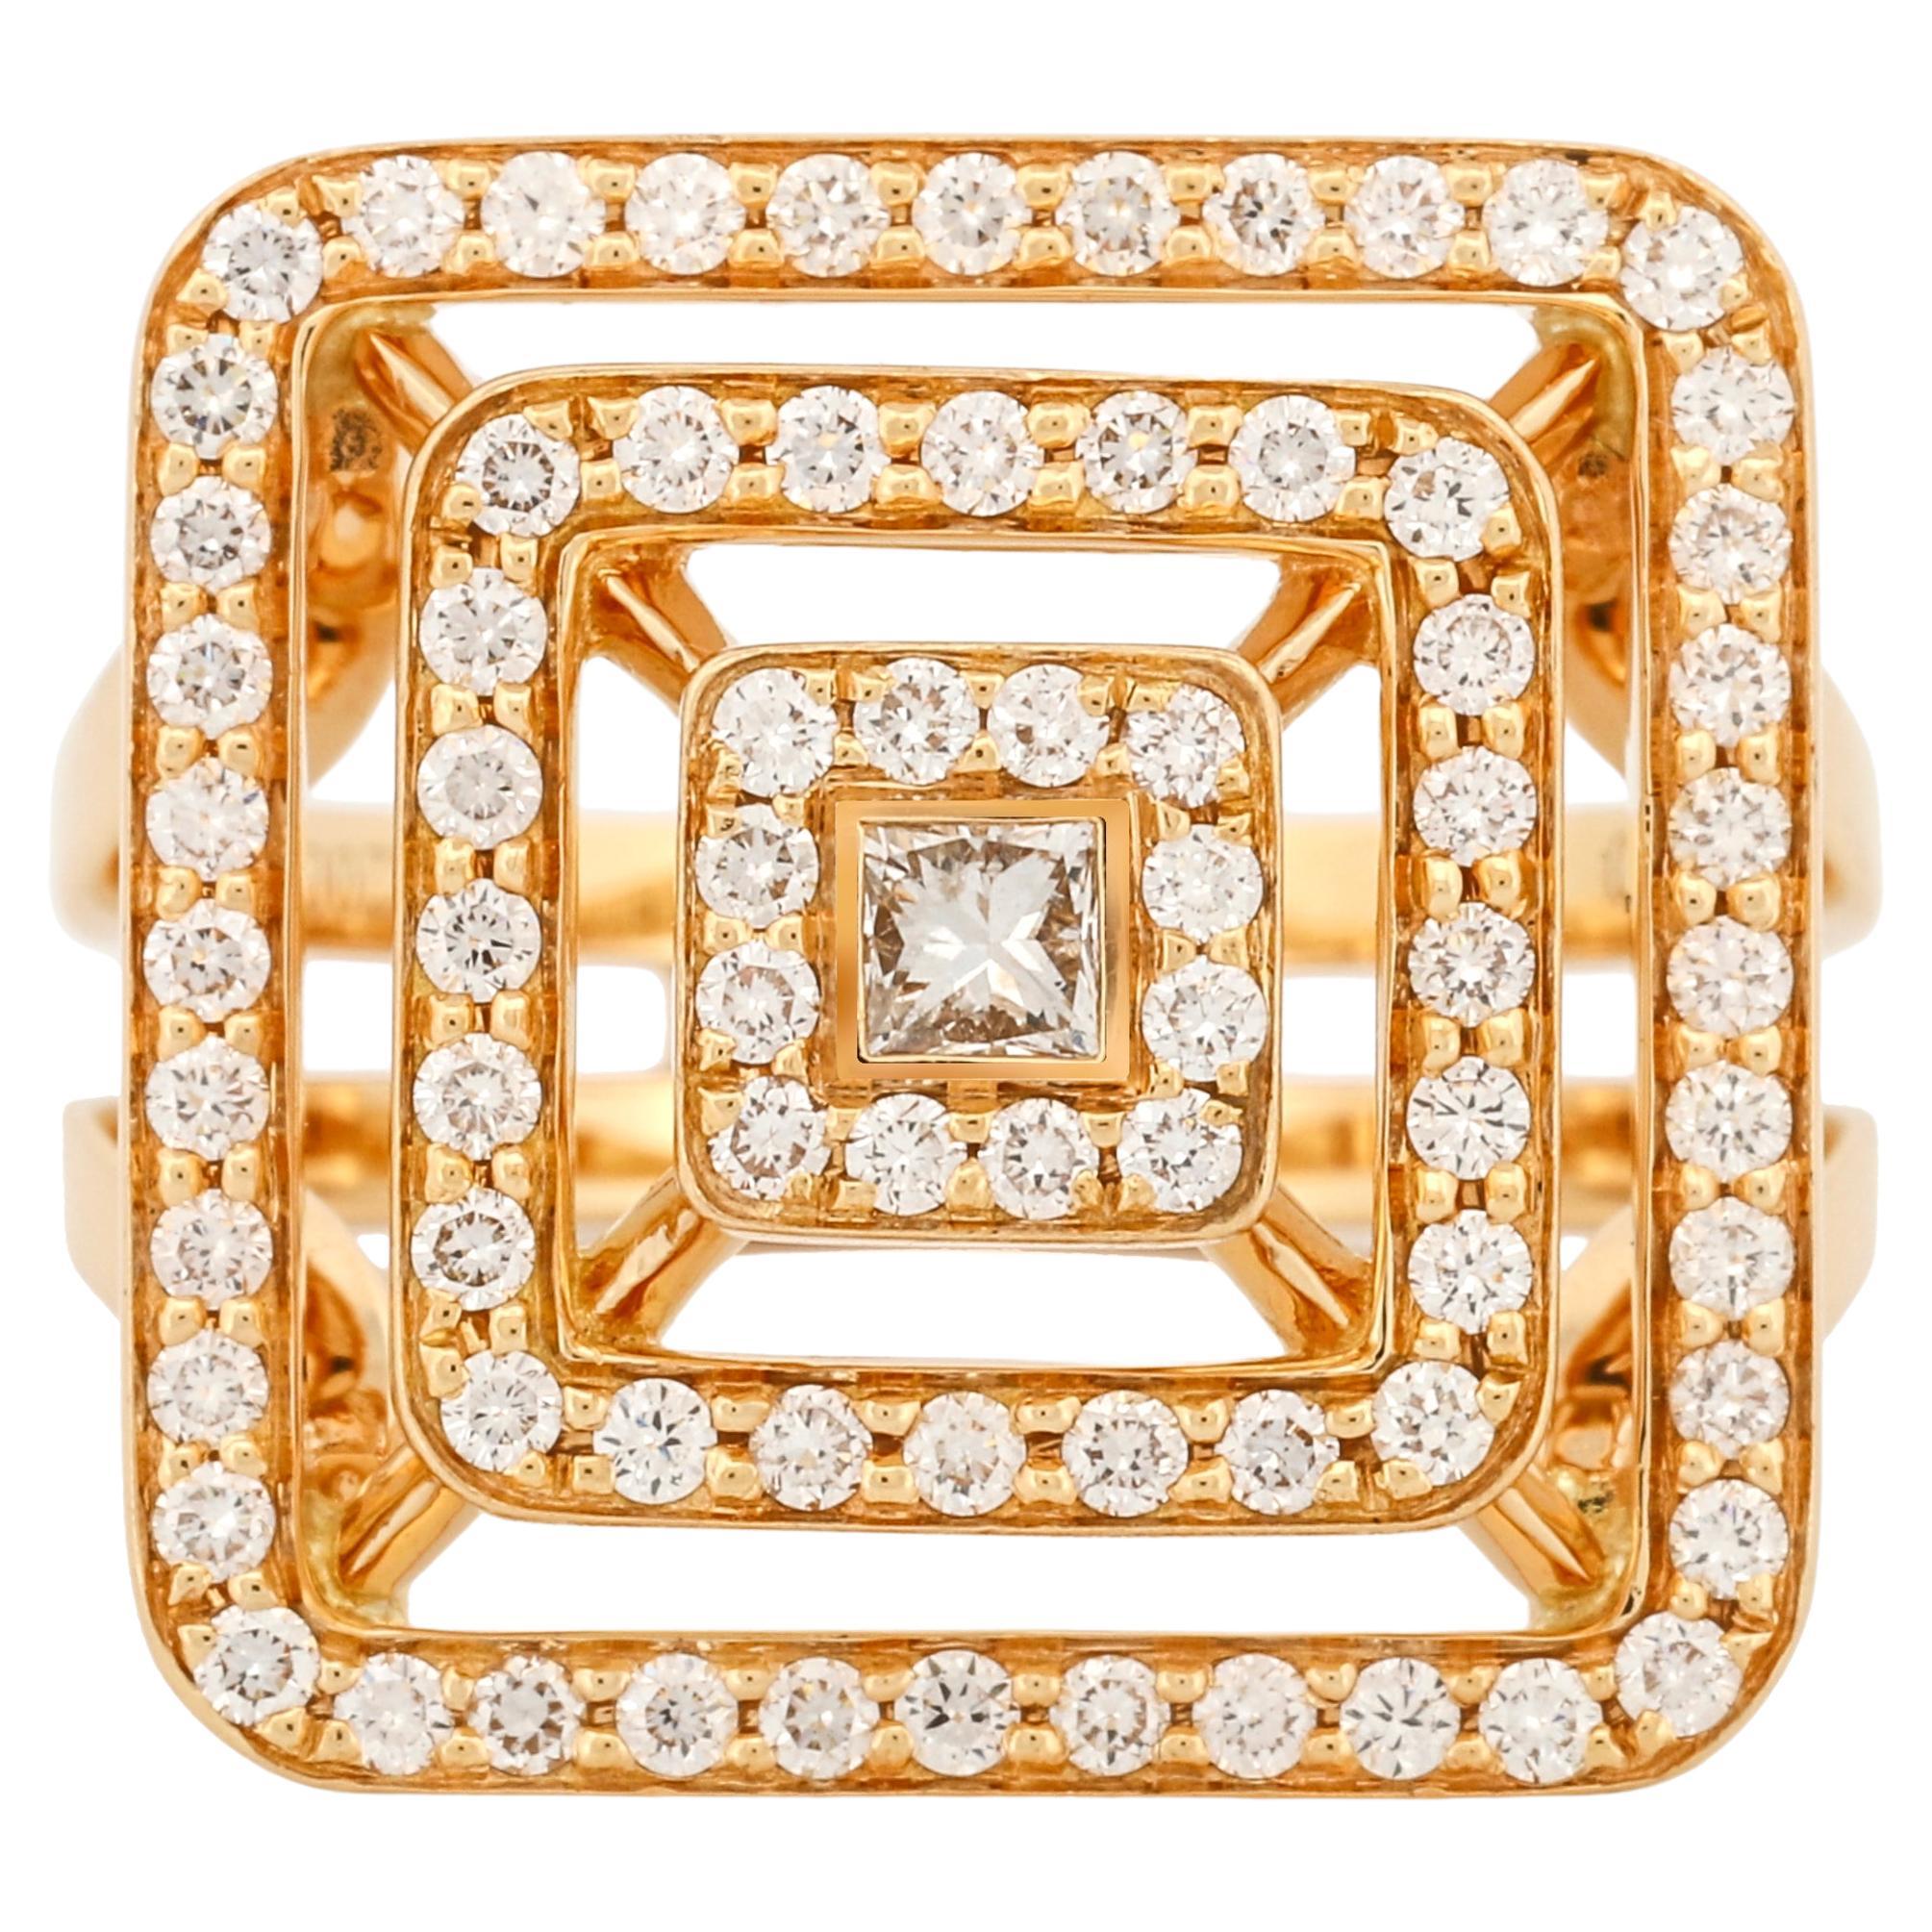 Mimi So Piece Pyramid Diamond Ring in 18k Yellow Gold Size 6.5 For Sale